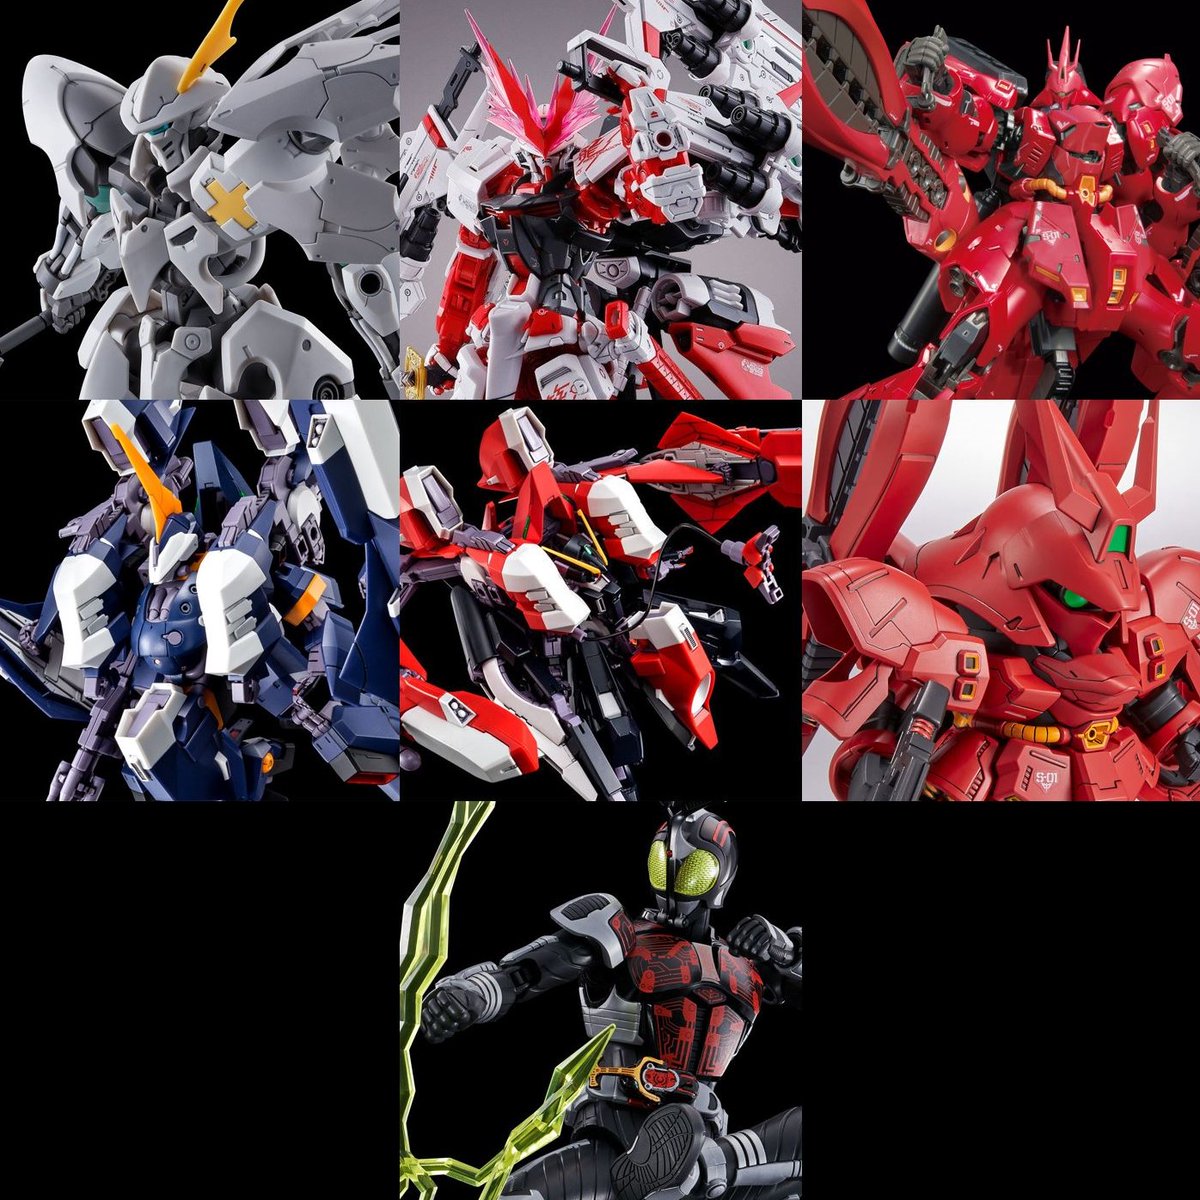 New hobby items such as #Gundam #Gunpla and #FigureRiseStandard are now available for pre-order on Premium Bandai. Check out all the details along with close-up pictures at the link below.

ow.ly/nFmf50OOPxL
Pre-order yours before it's too late.